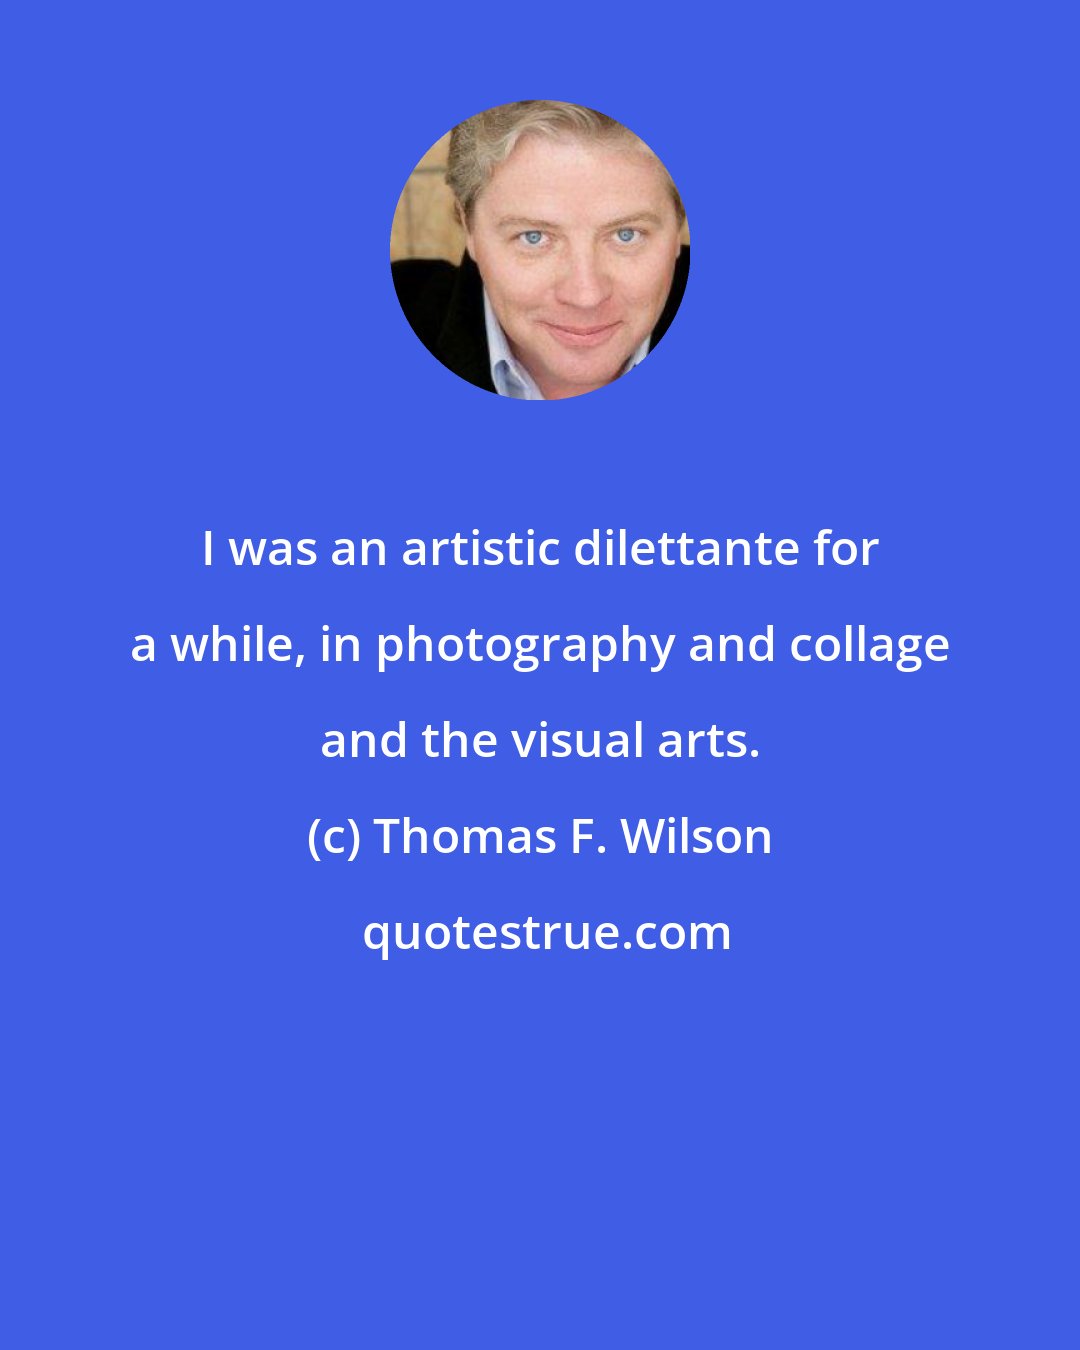 Thomas F. Wilson: I was an artistic dilettante for a while, in photography and collage and the visual arts.